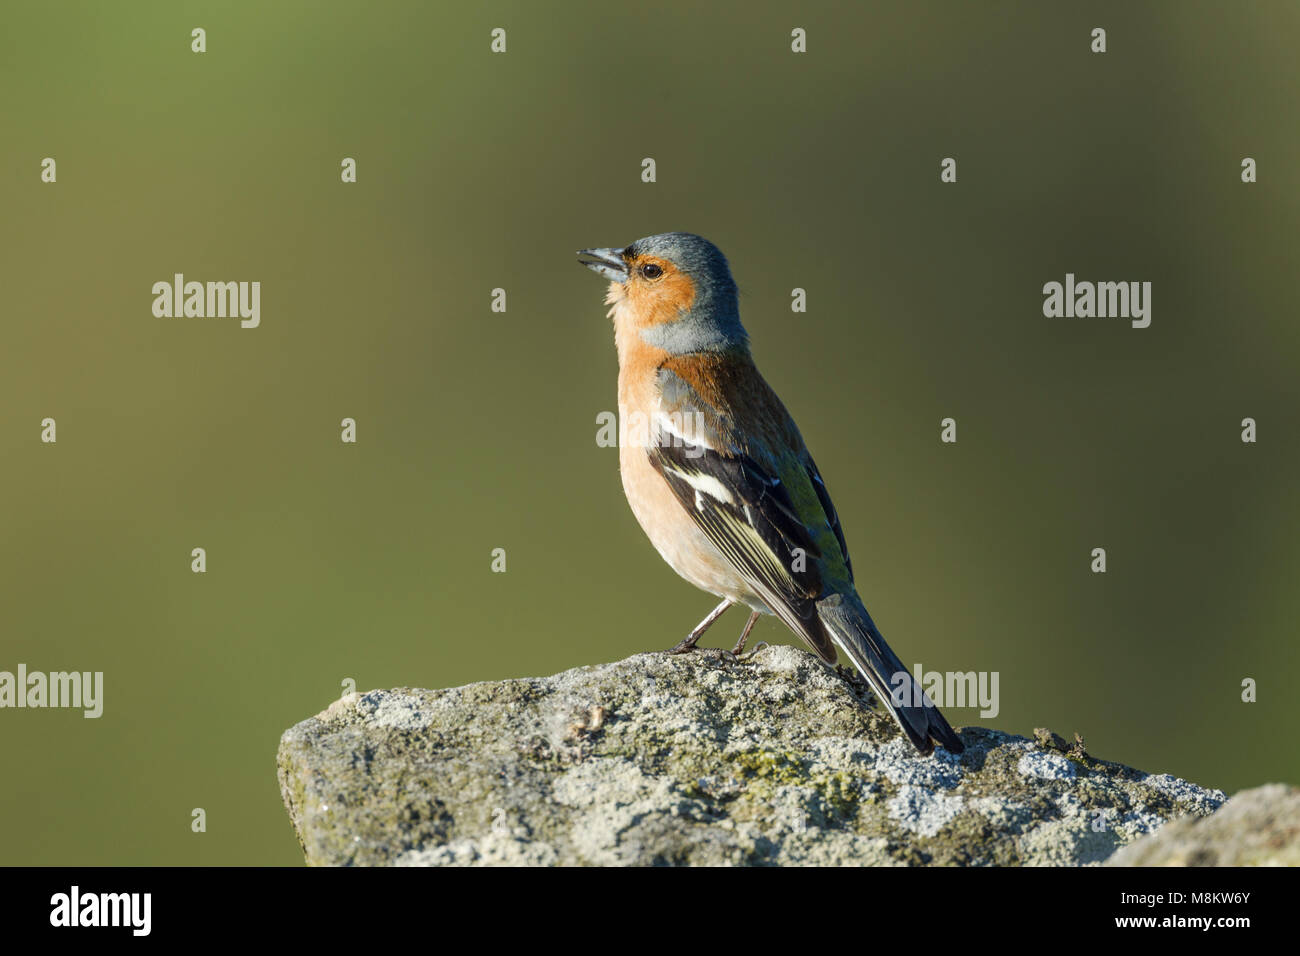 Male chaffinch, Latin name Fringilla coelebs, standing on a lichen covered rock while calling Stock Photo